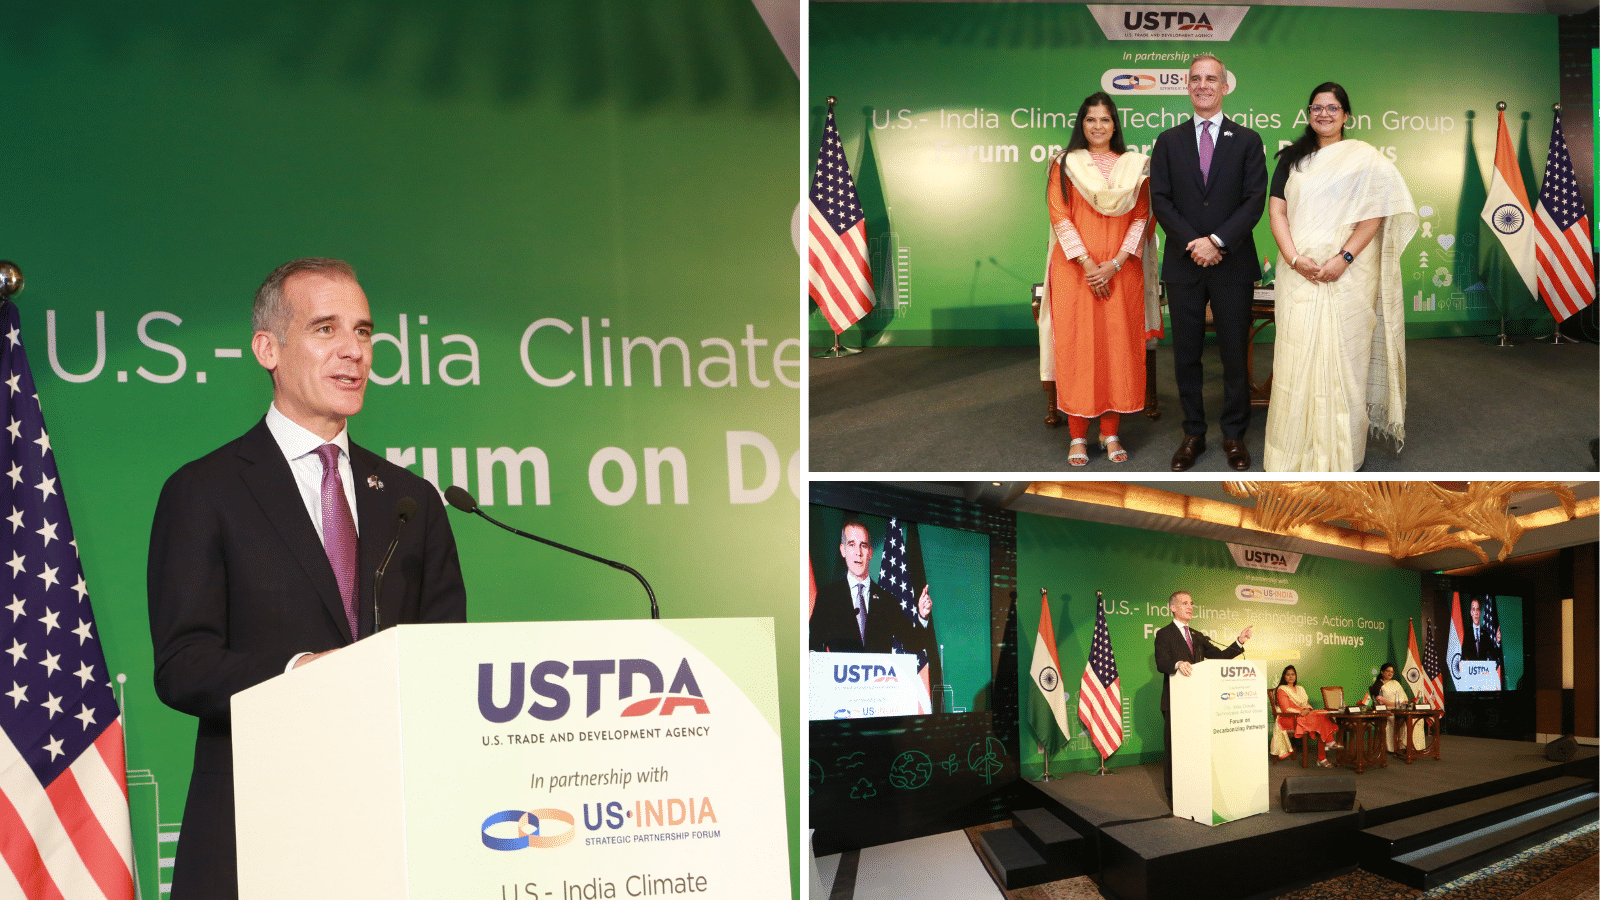 U.S. -India Forum on Decarbonizing Pathways Climate Technologies Actions Group Forum